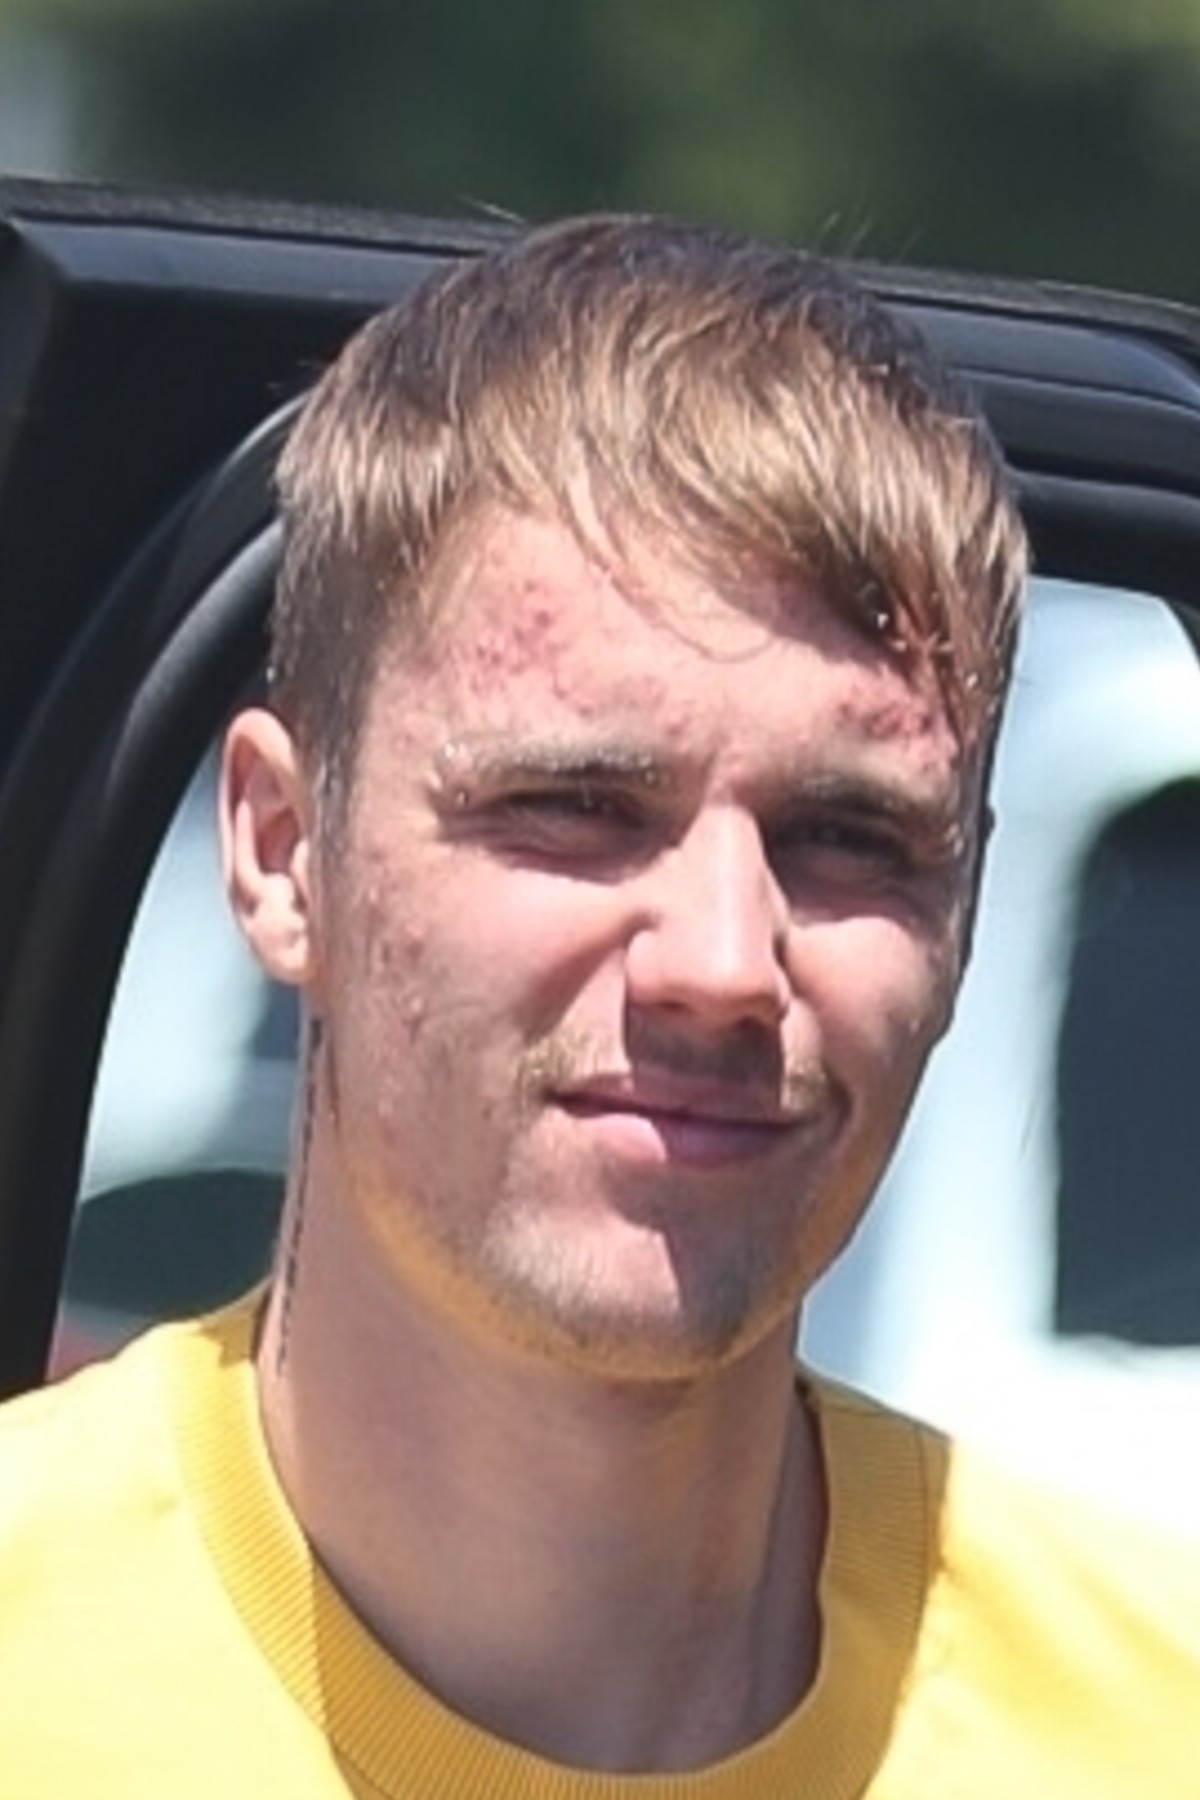 Beverly Hills, CA  - Justin Bieber is out in Beverly Hills doing some promotional work for his Drew clothing brand. JB, who rocks a yellow Drew hoodie, hands out sheets of Drew stickers to fans and photographers in the 90210.

BACKGRID USA 20 AUGUST 2019, Image: 466389924, License: Rights-managed, Restrictions: , Model Release: no, Credit line: TheHollywoodFix.com / BACKGRID / Backgrid USA / Profimedia